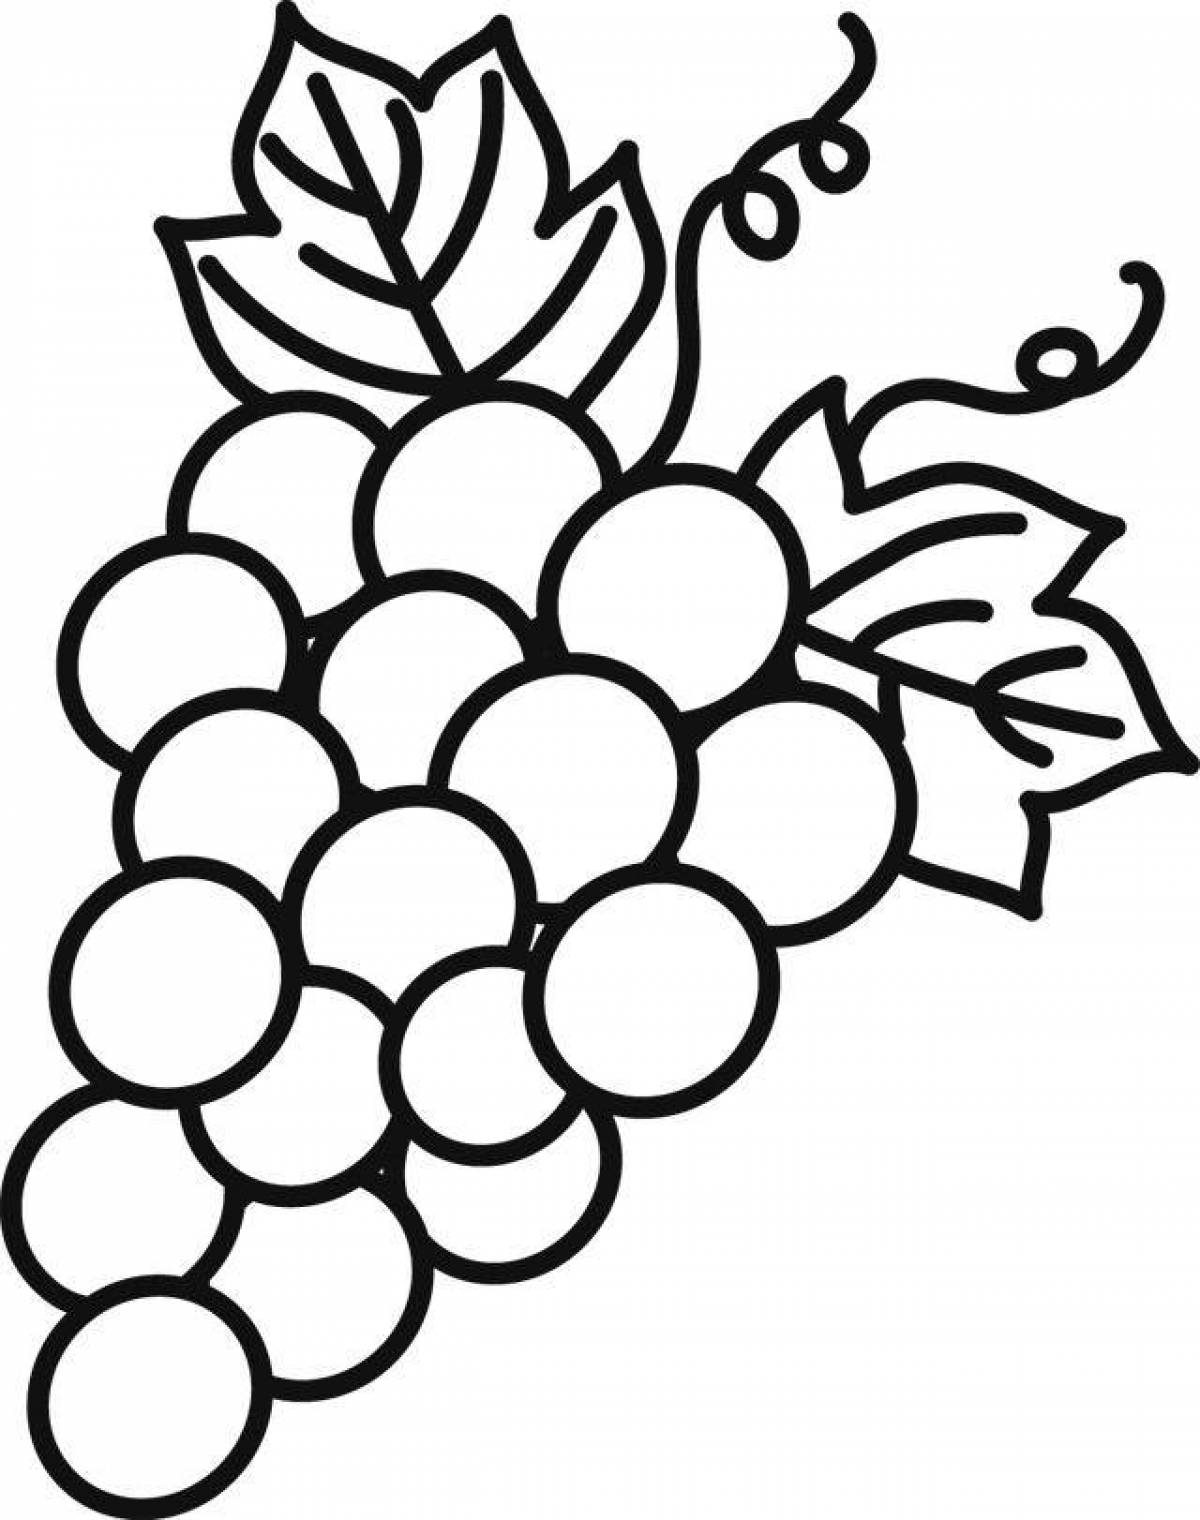 Adorable bunch of grapes coloring page